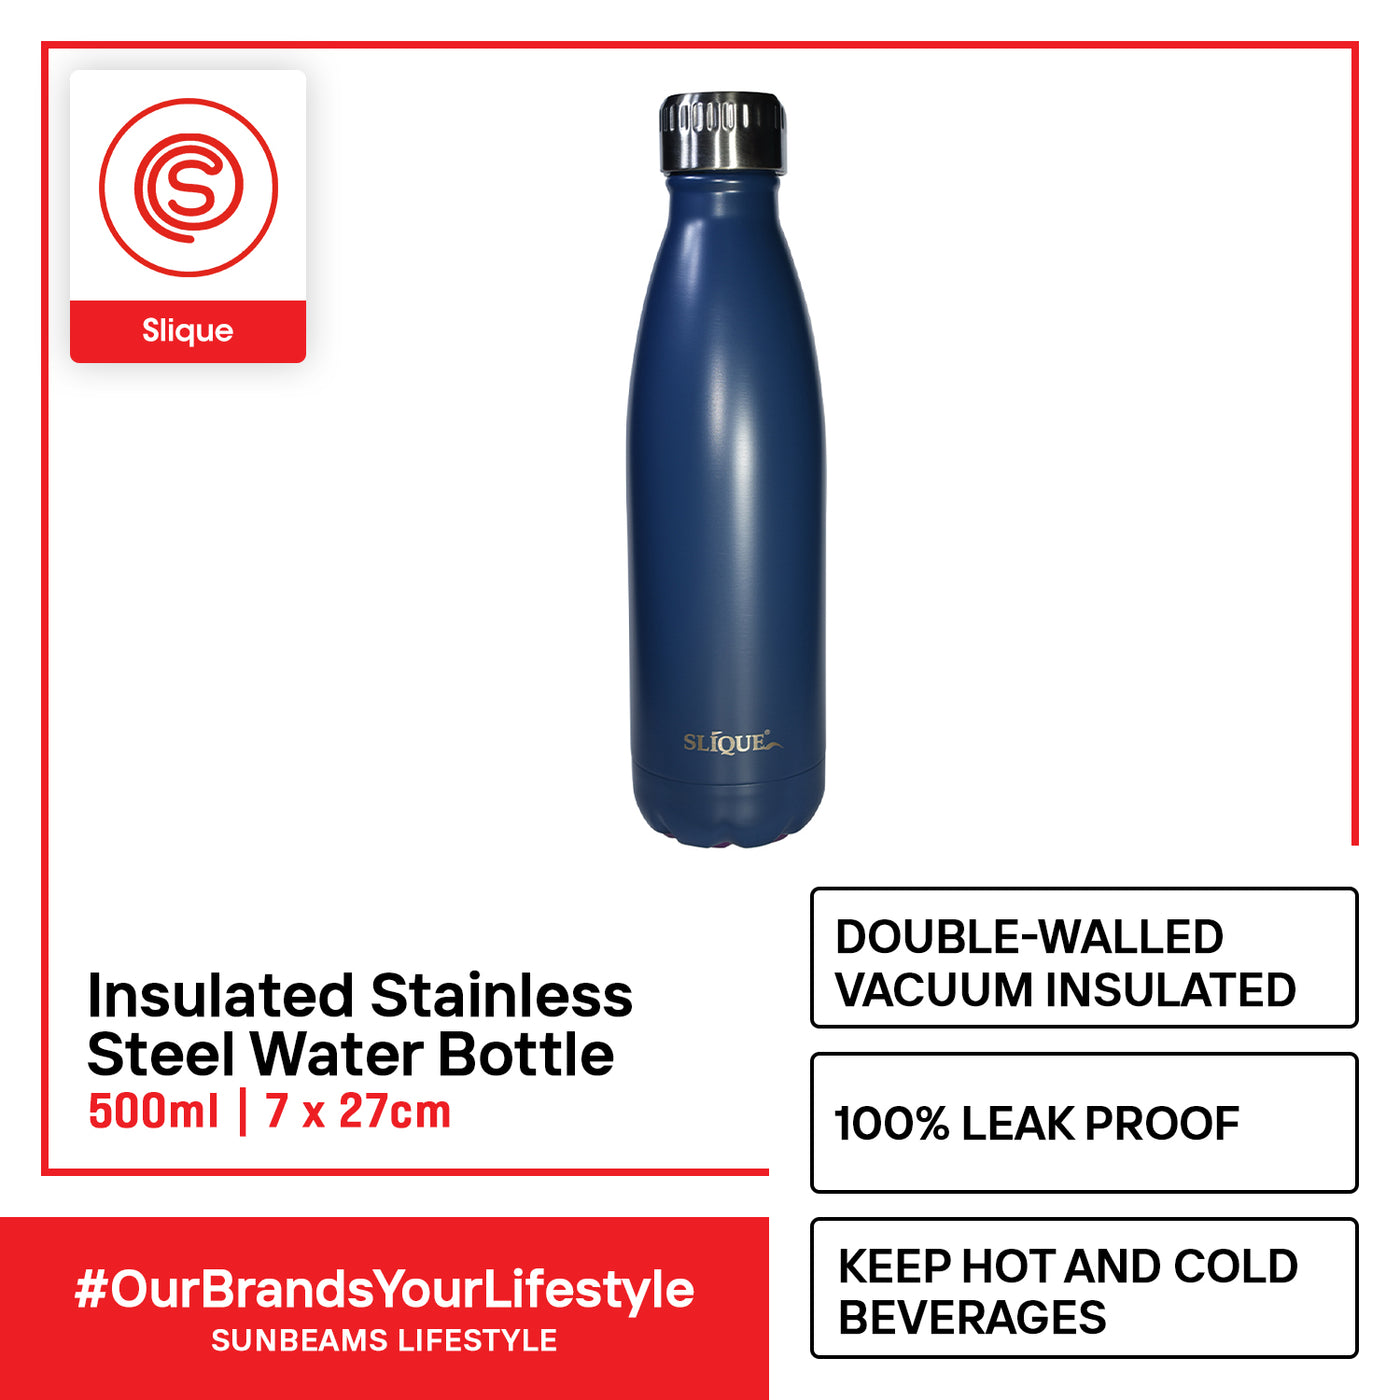 SLIQUE Stainless Steel Matte Finish Insulated Water Bottle 500ml Amazing Gift Idea For Any Occasion! (Dark Blue)